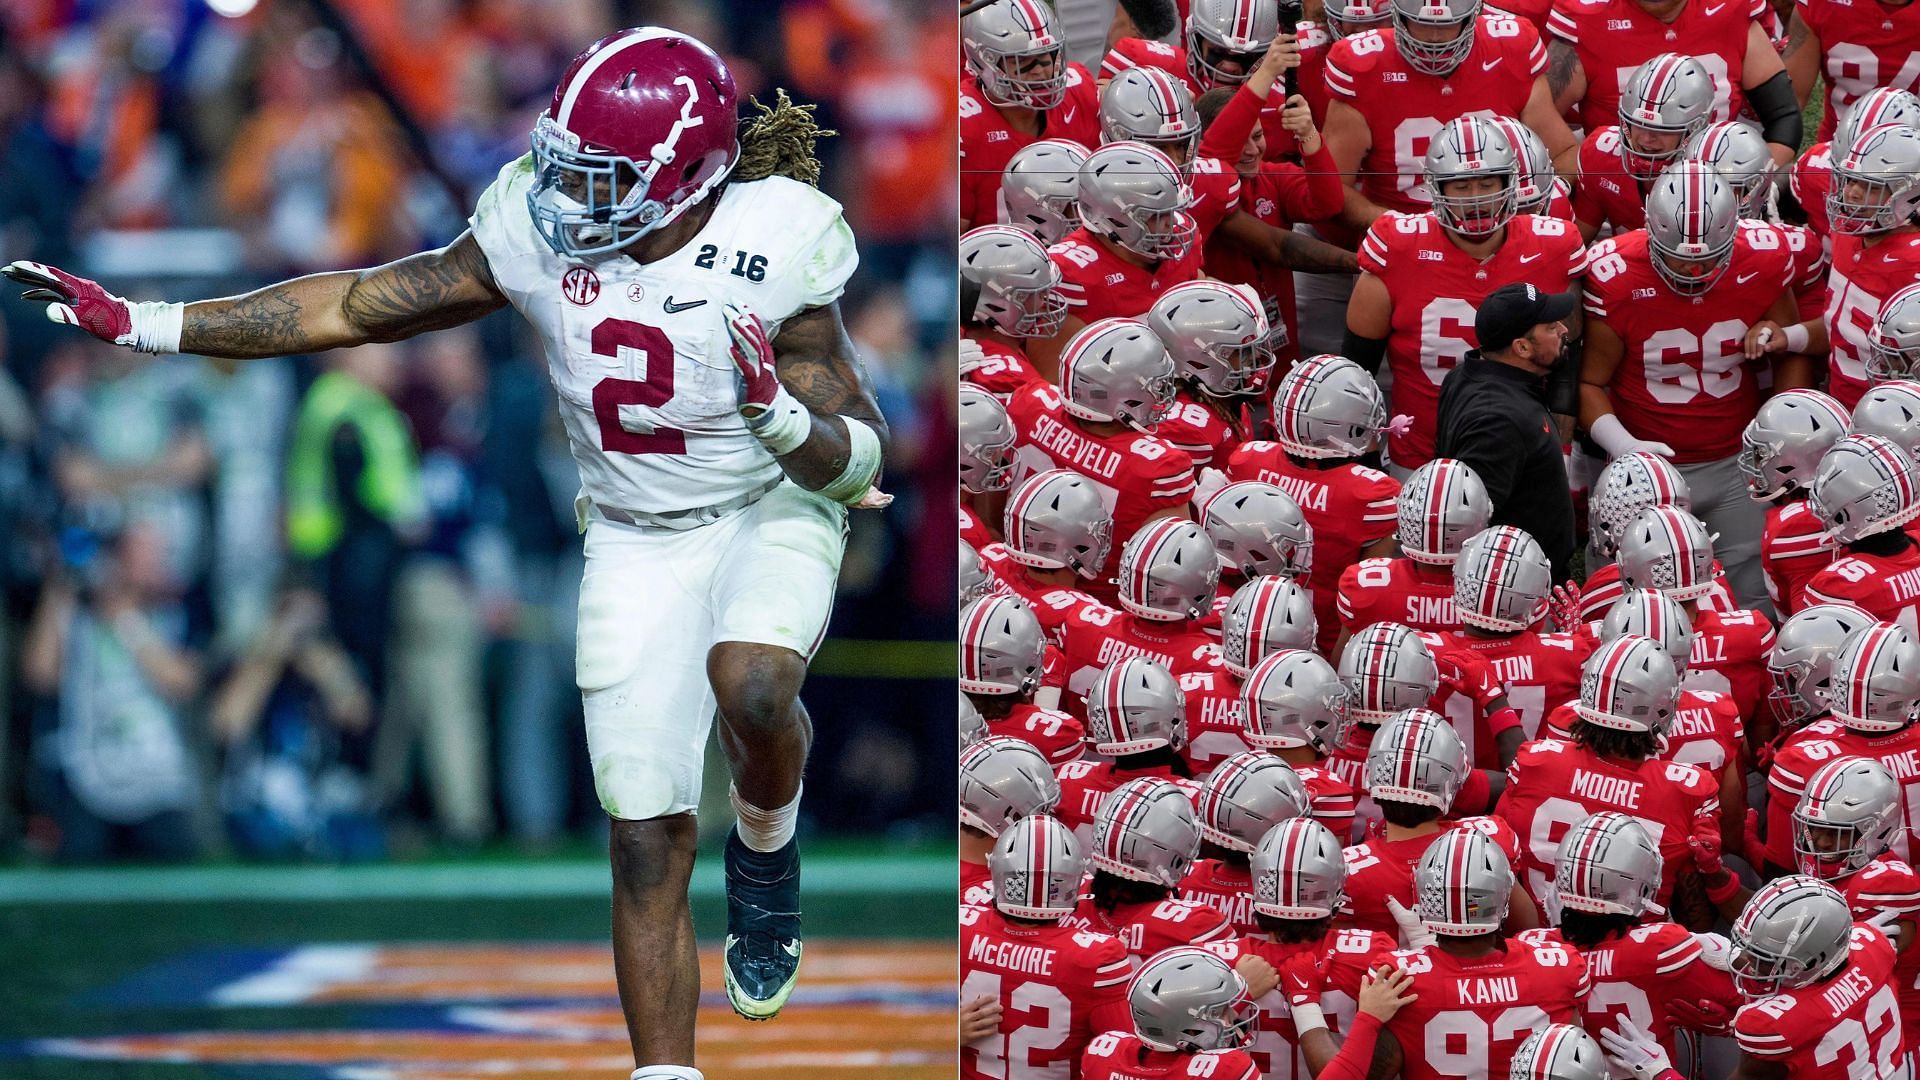 Alabama and Ohio State are among the college football programs with the most players on NFL rosters